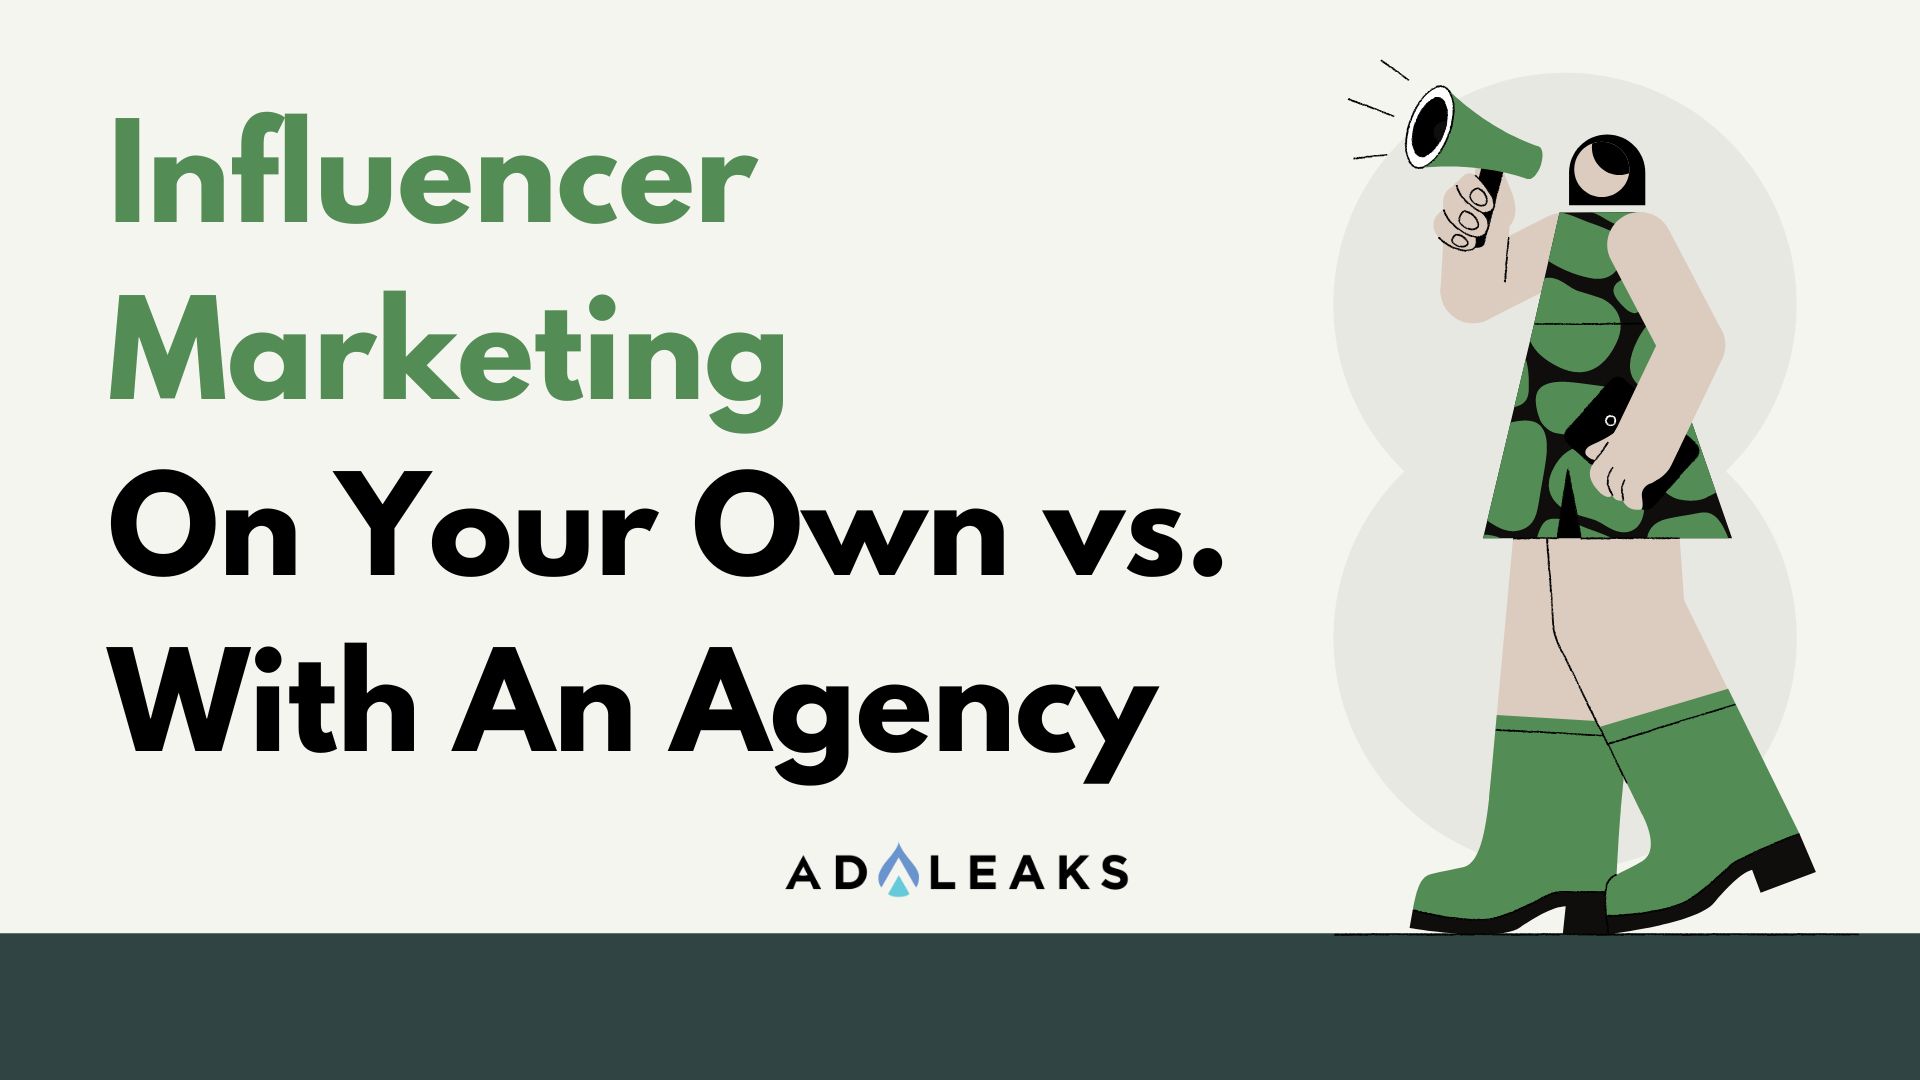 influencer marketing on your own vs. with an agency